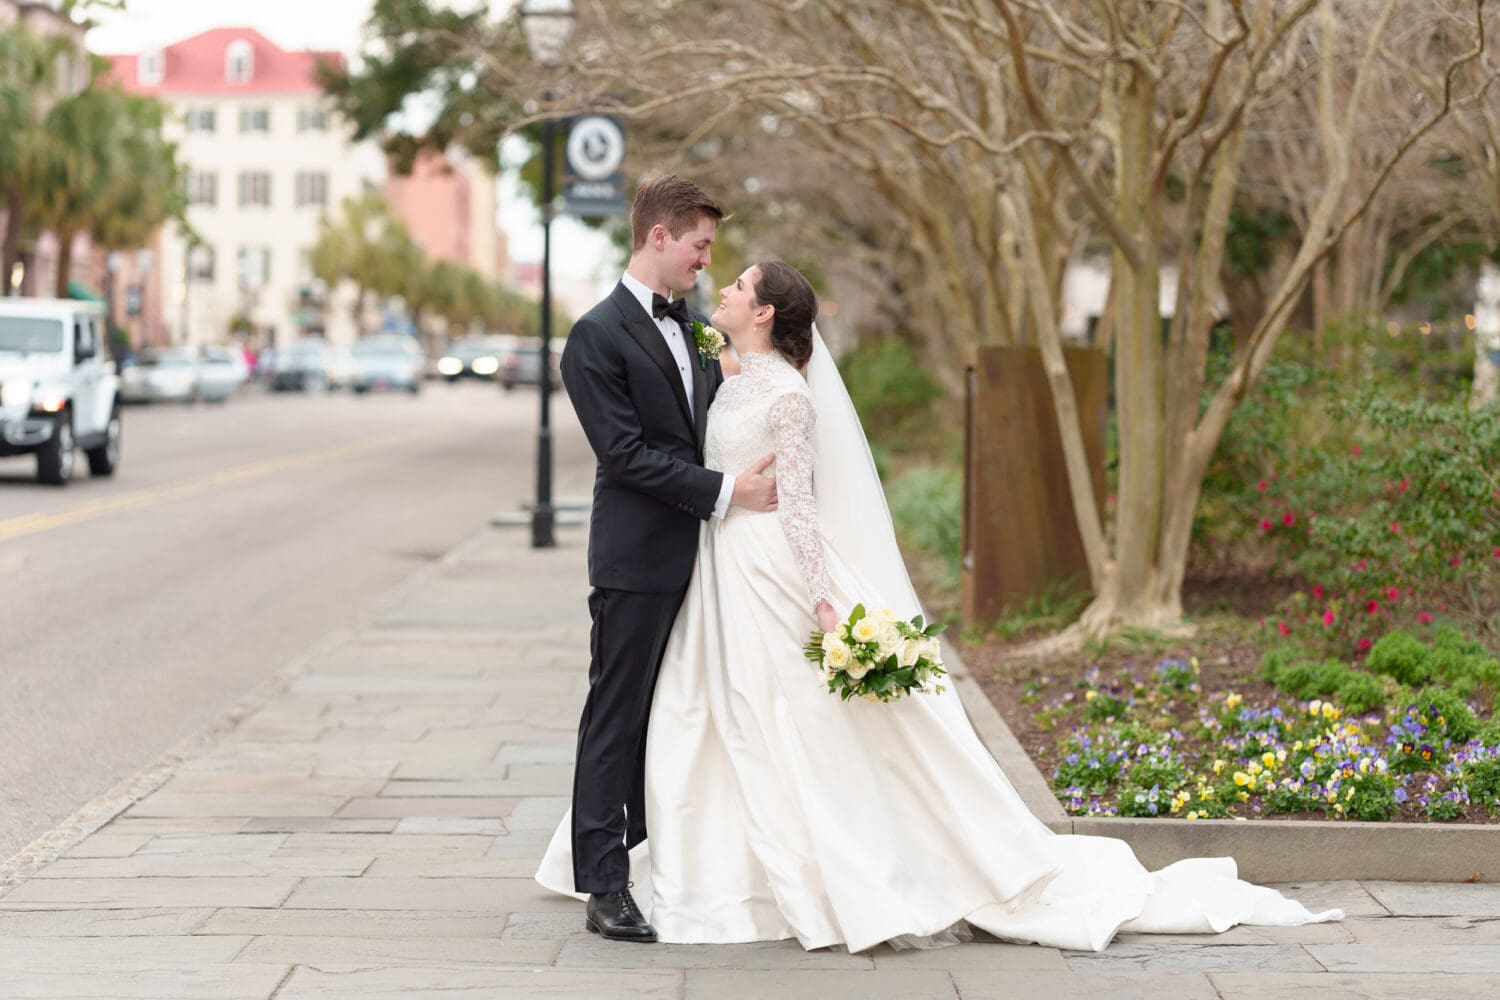 Bride and groom on the busy street - Marion Square Charleston